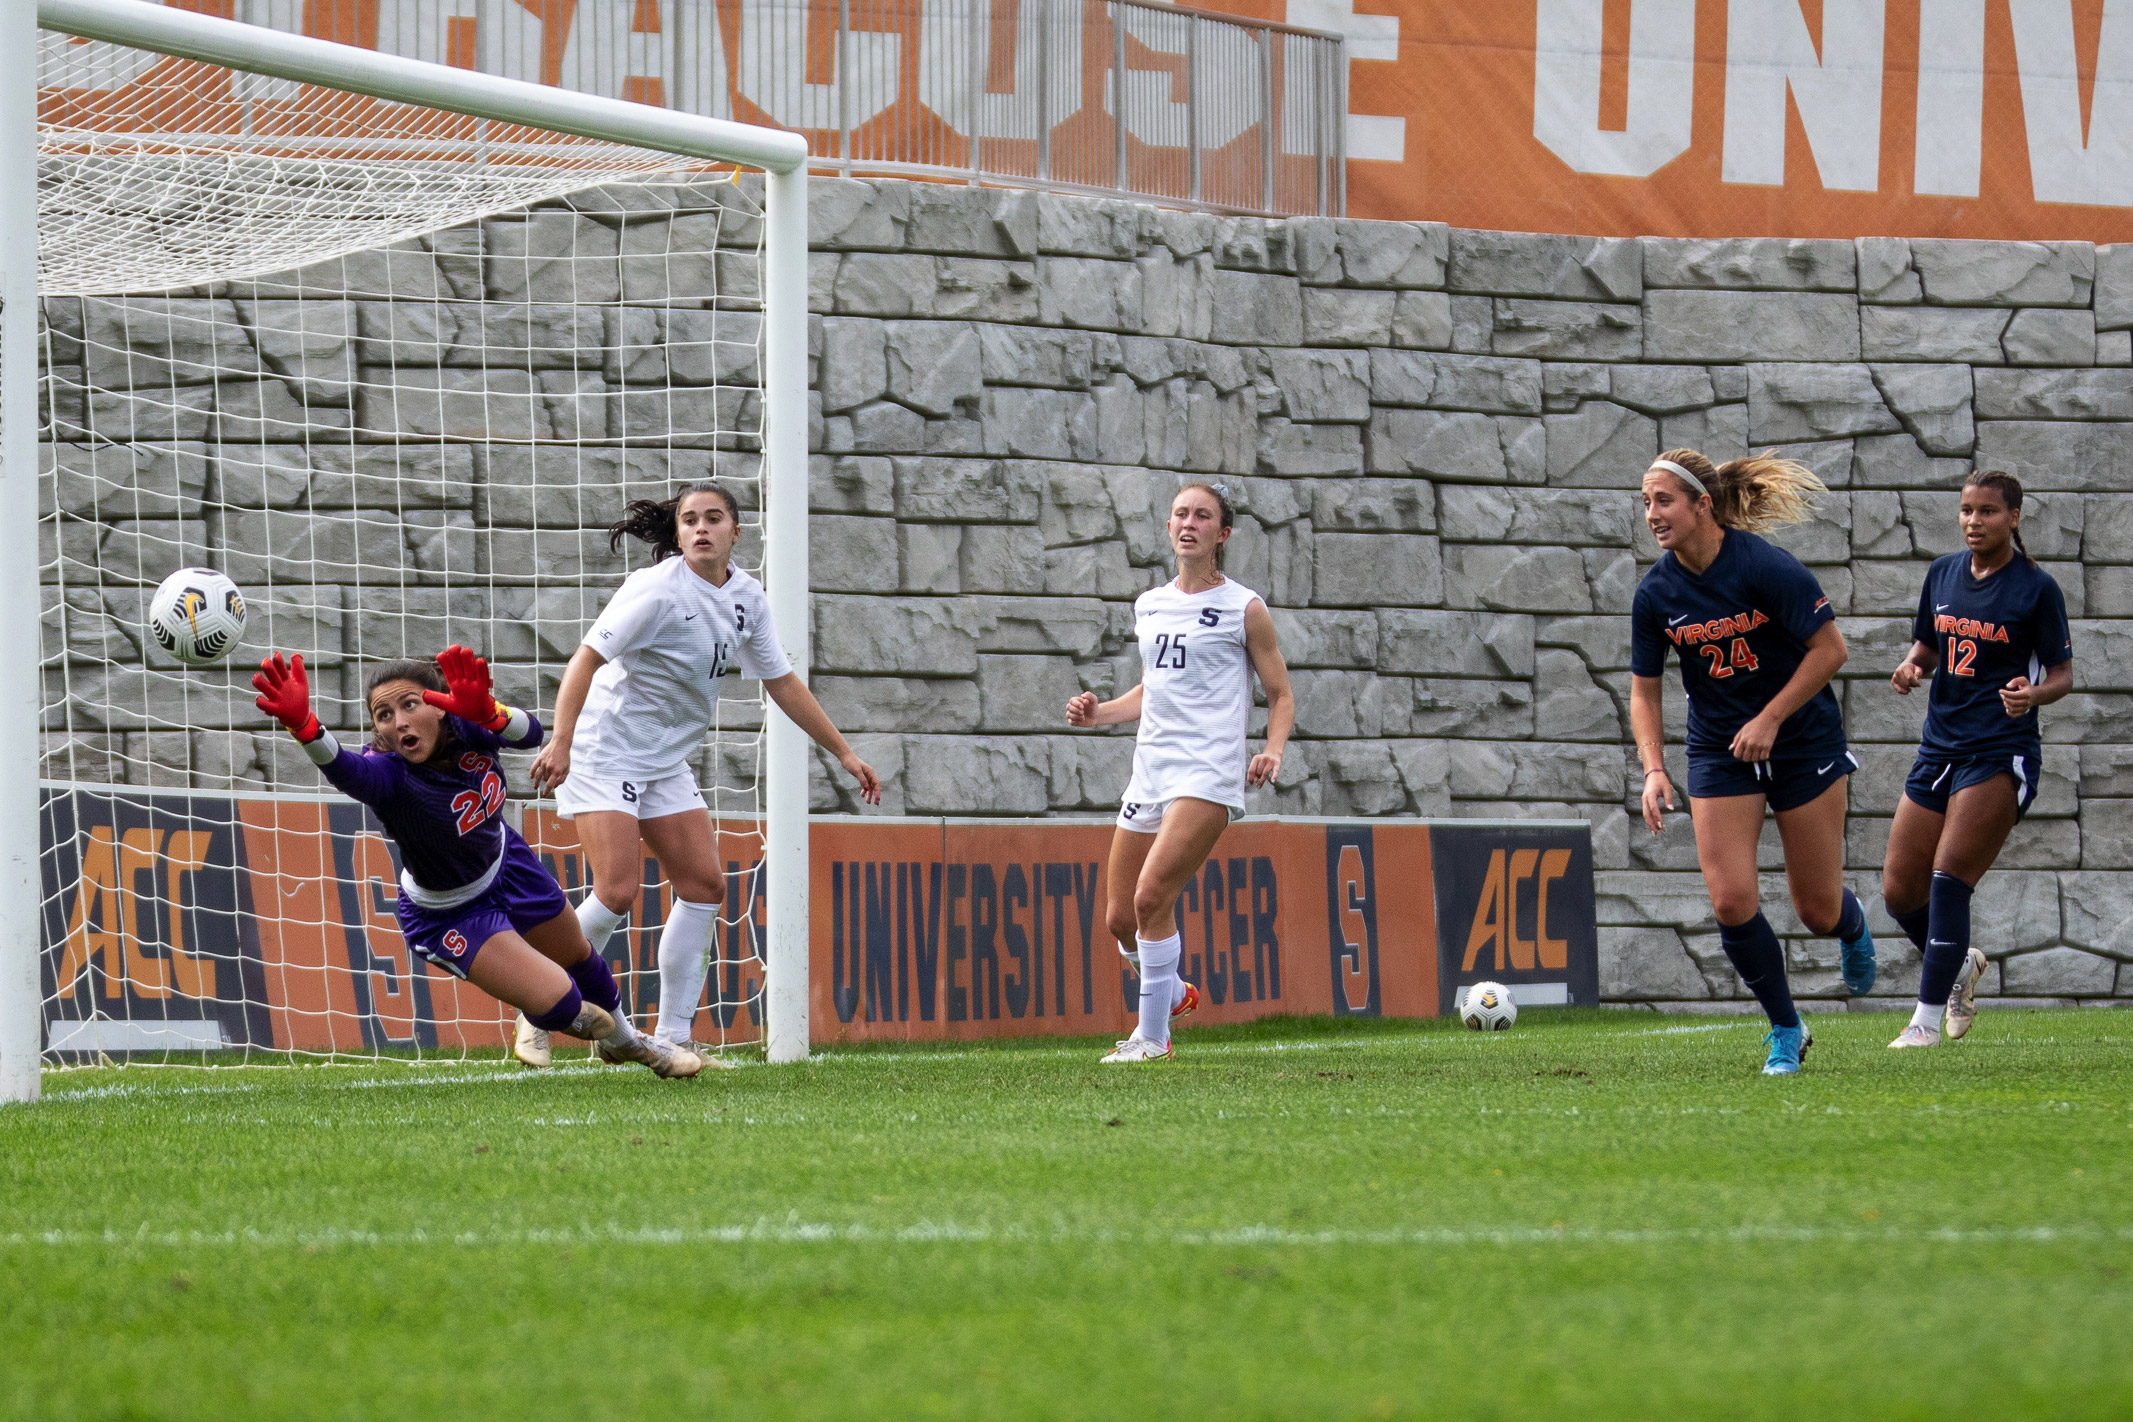 The ball flies past Syracuse's net-minder, Lysianne Proulx, for one of Virginia's five goals in the emphatic win over Syracuse on Sunday, October 10th, 2021..